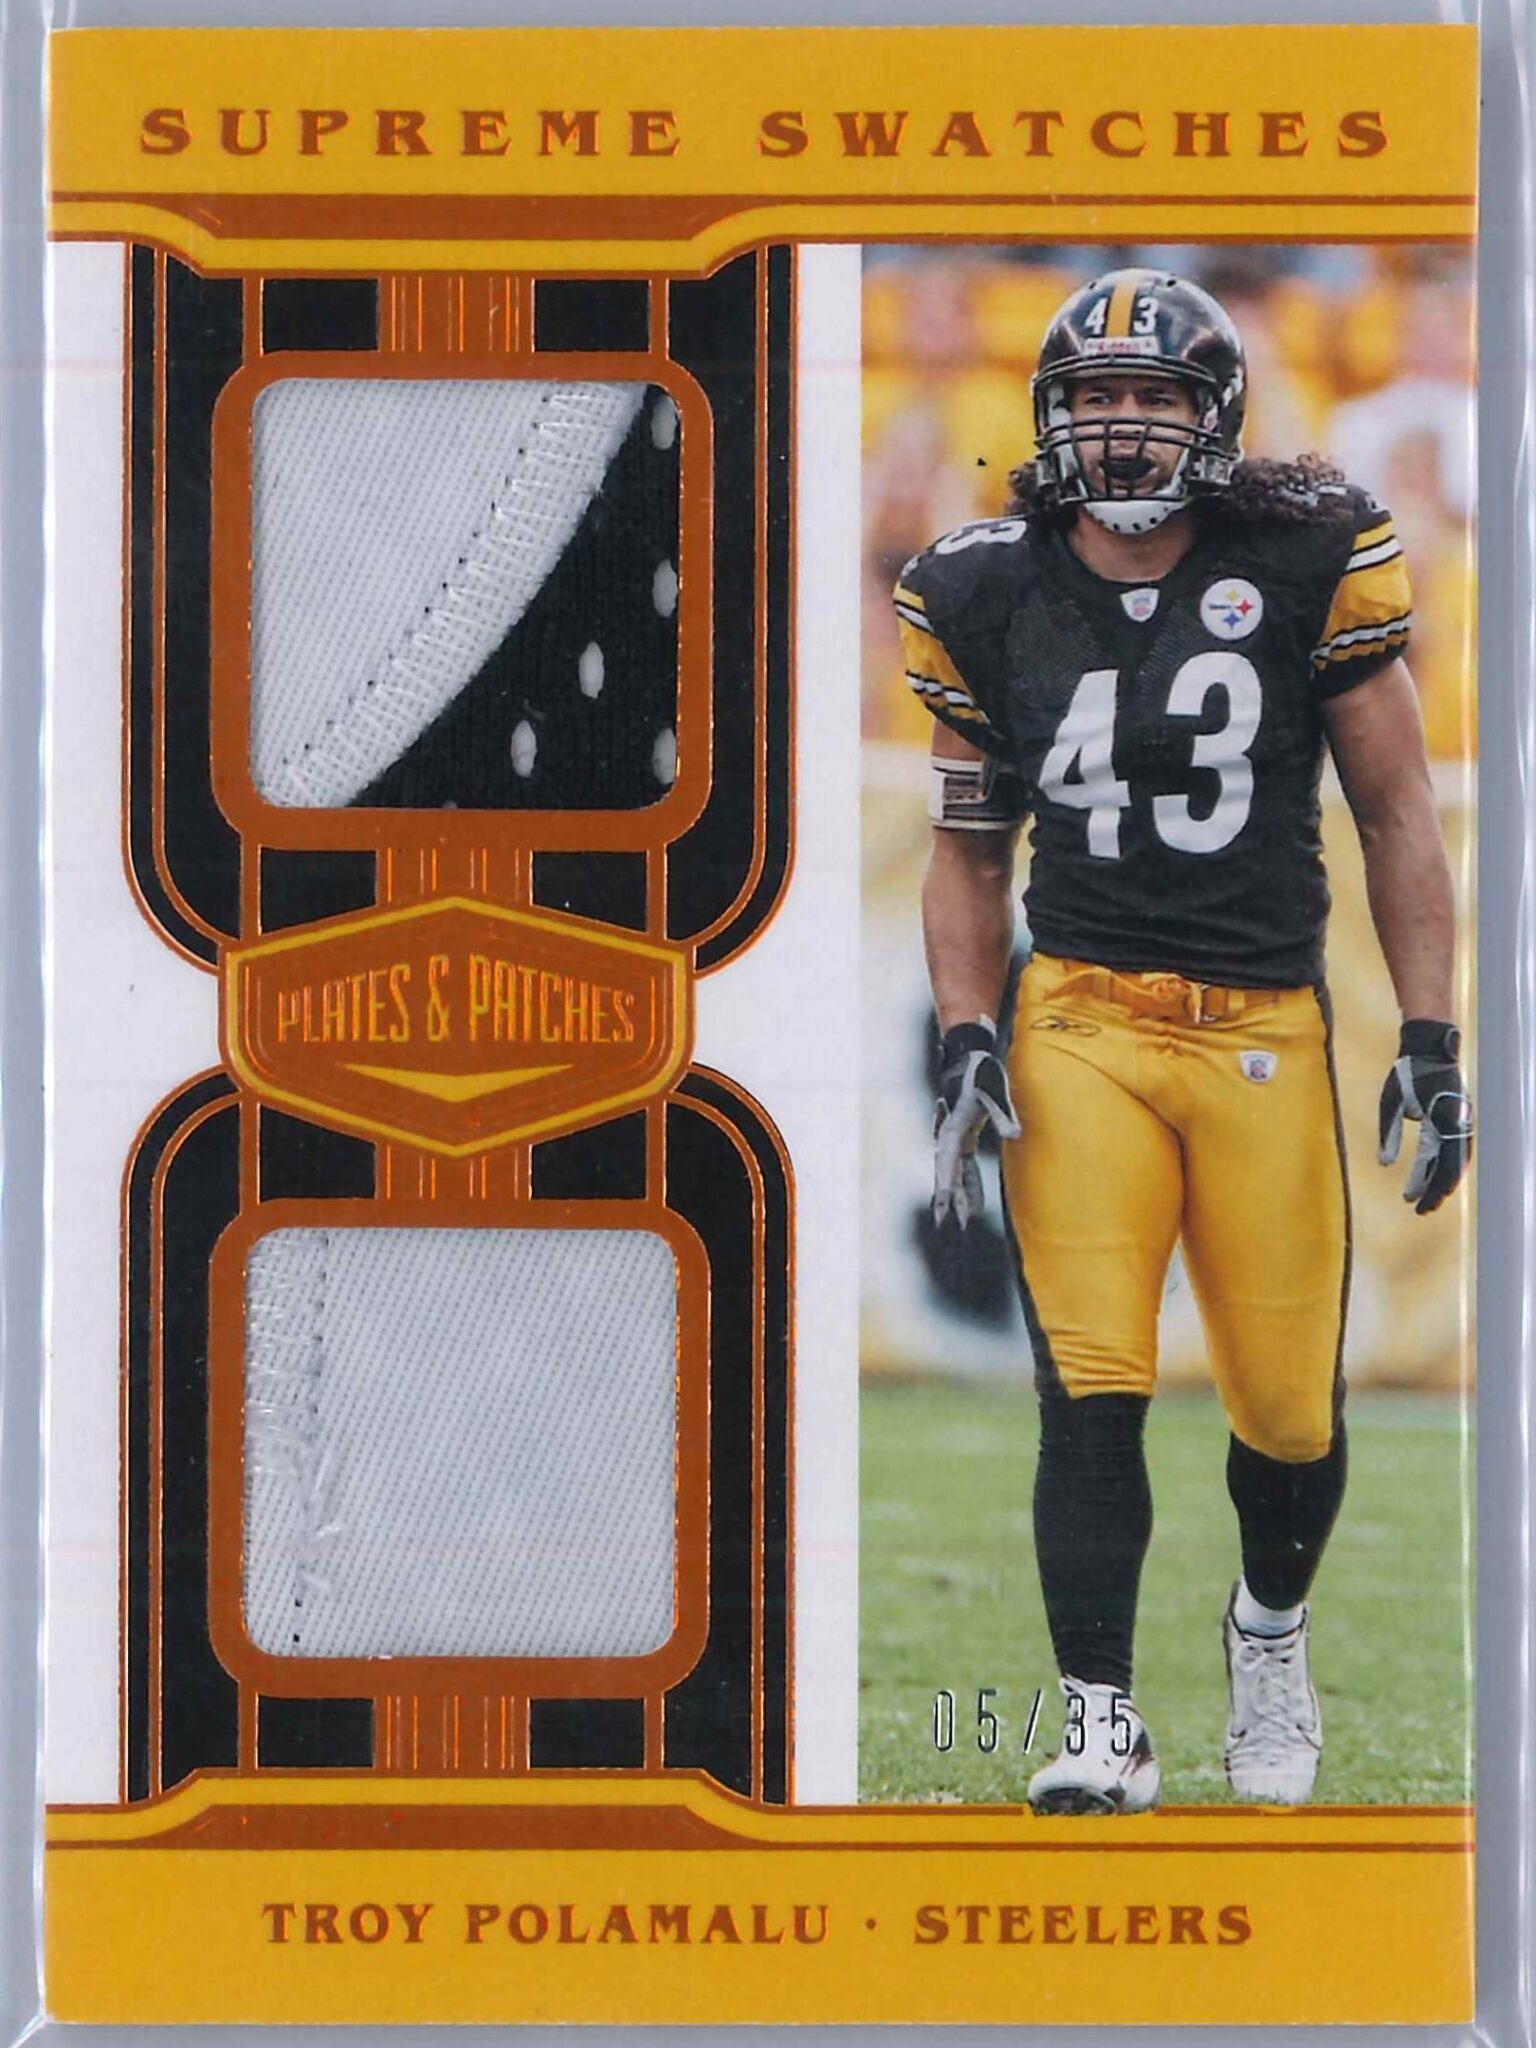 Troy Polamalu Panini Plates and Patches 2020 Supreme Swatches 0535 2 Color Patch 1 scaled